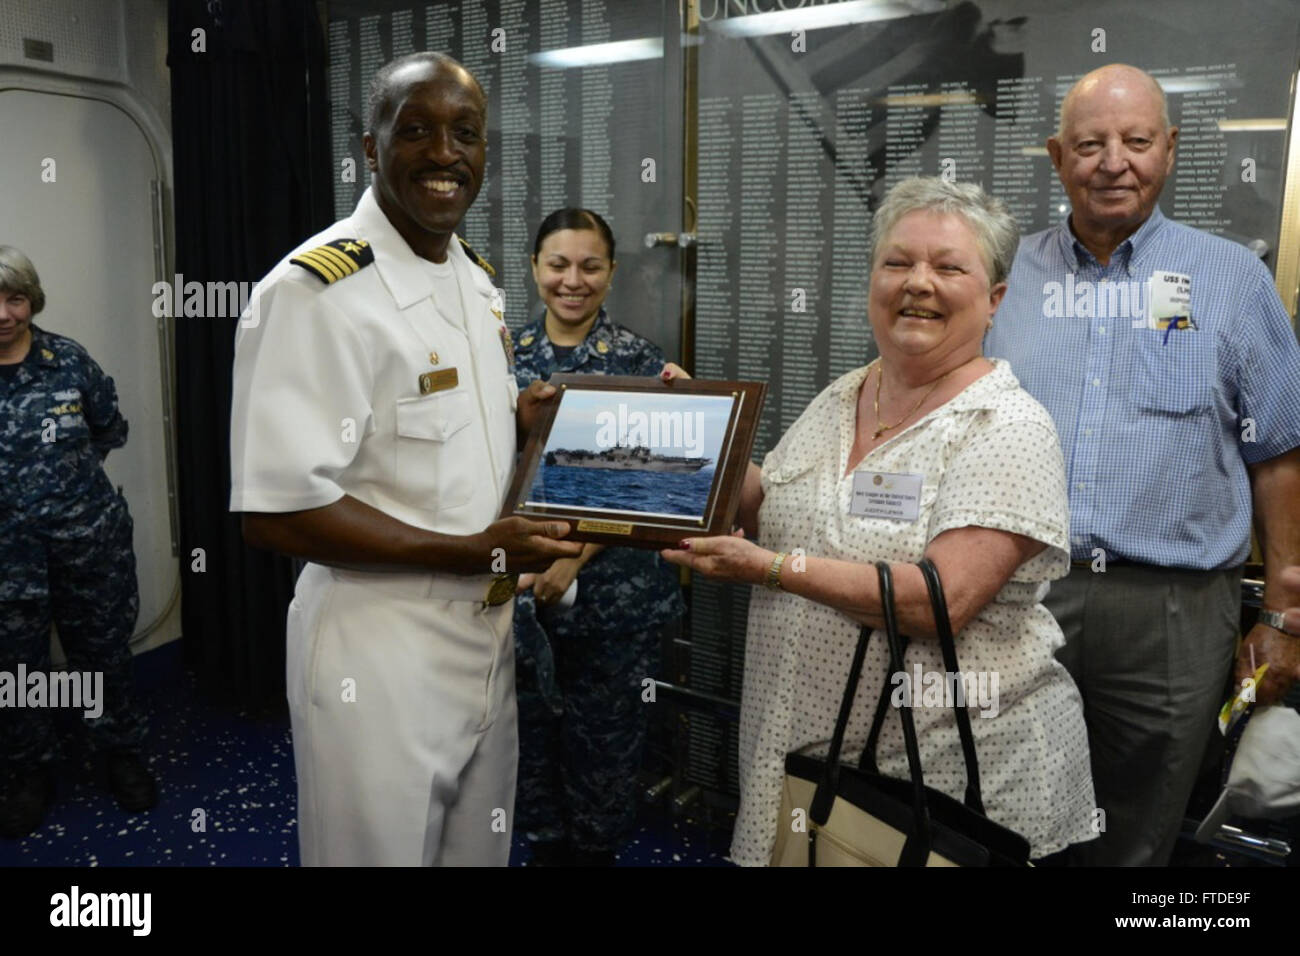 150629-N-JA759-190 VALENCIA, Spain (June 29, 2015) Capt. Dana Gordon, commanding officer of the amphibious assault ship USS Iwo Jima (LHD 7), presents a gift of thanks to Judith Lewis, Chapter President of the Navy League of the United States, after a tour aboard USS Iwo Jima in Valencia, Spian, June 29, 2015. USS Iwo Jima is the flagship for the Iwo Jima Amphibious Ready Group/24th Marine Expeditionary Unit and is conducting naval operations in the U. S. 6th Fleet area of operations in support of U. S. national security interests in Europe. (Mass Communication Specialist 1st Class Barry Abbot Stock Photo